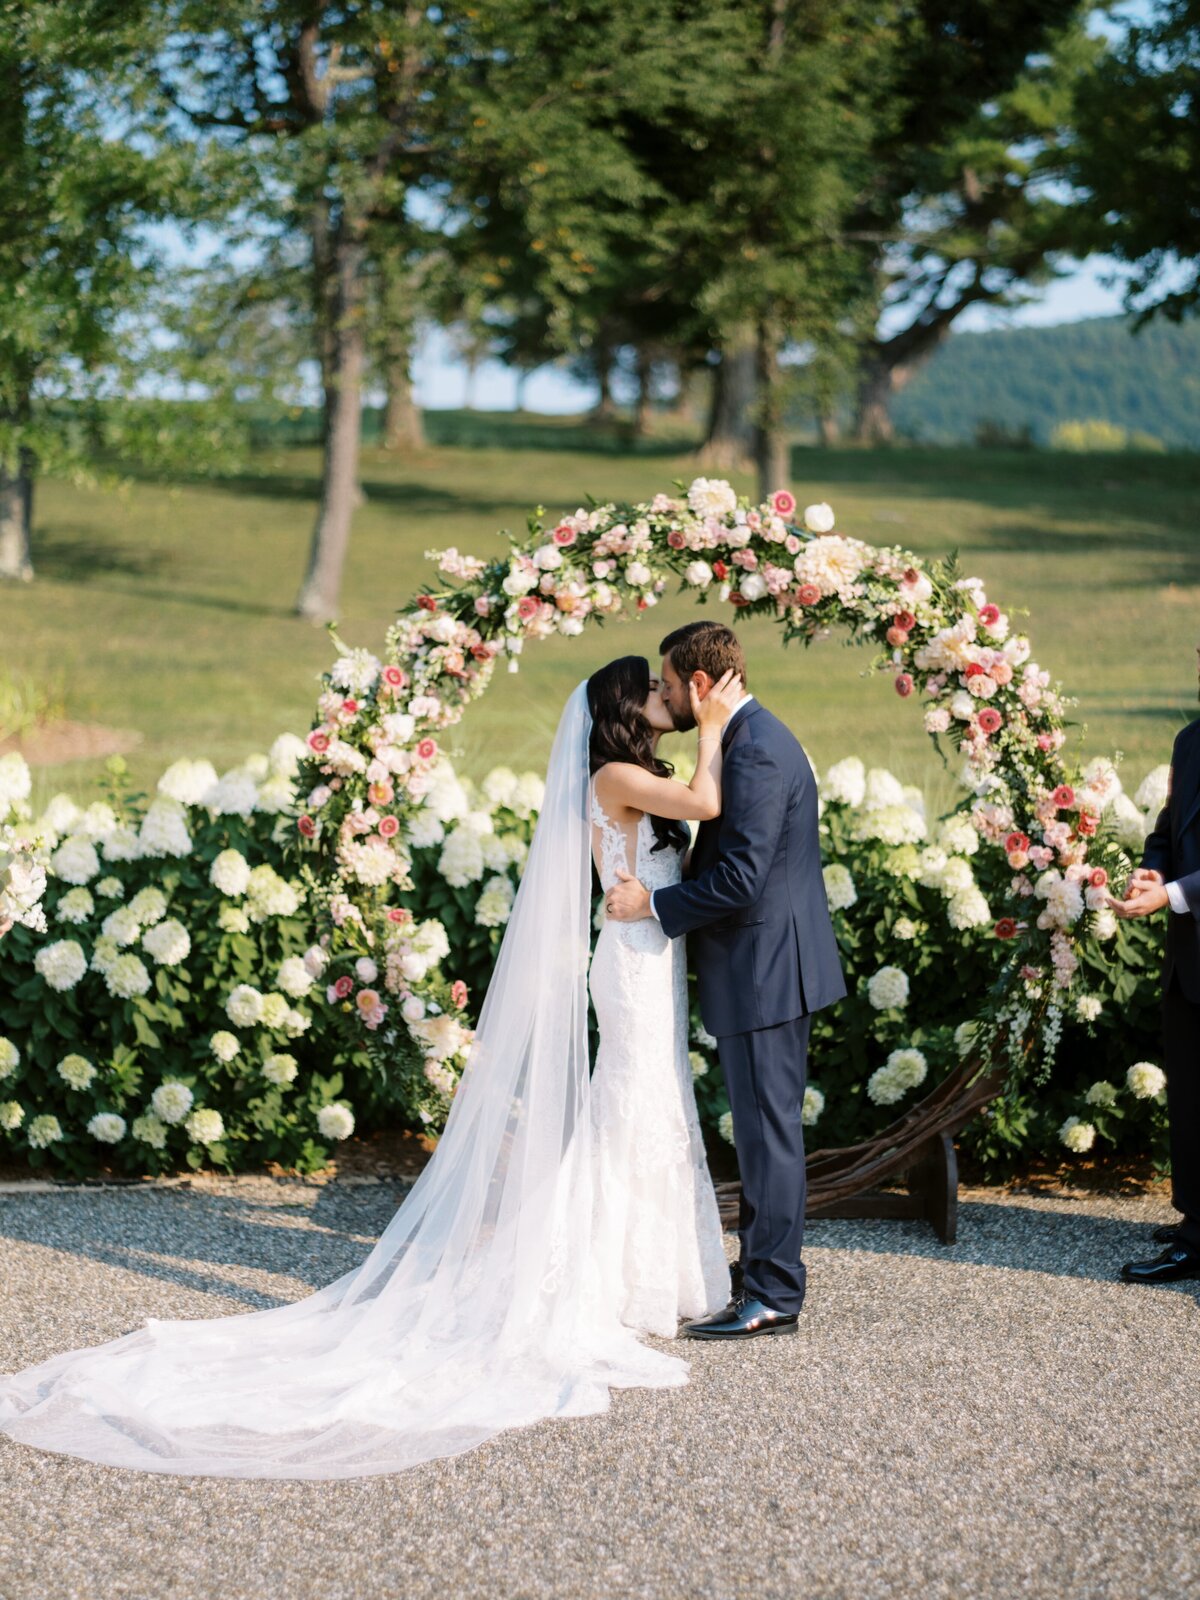 Lindsay Lazare Photography New York Wedding Engagement Photographer Hudson Valley Destination Travel Intentional Timeless Connection Drive Luxury Heirloom Photographs Photos  LLPF0959